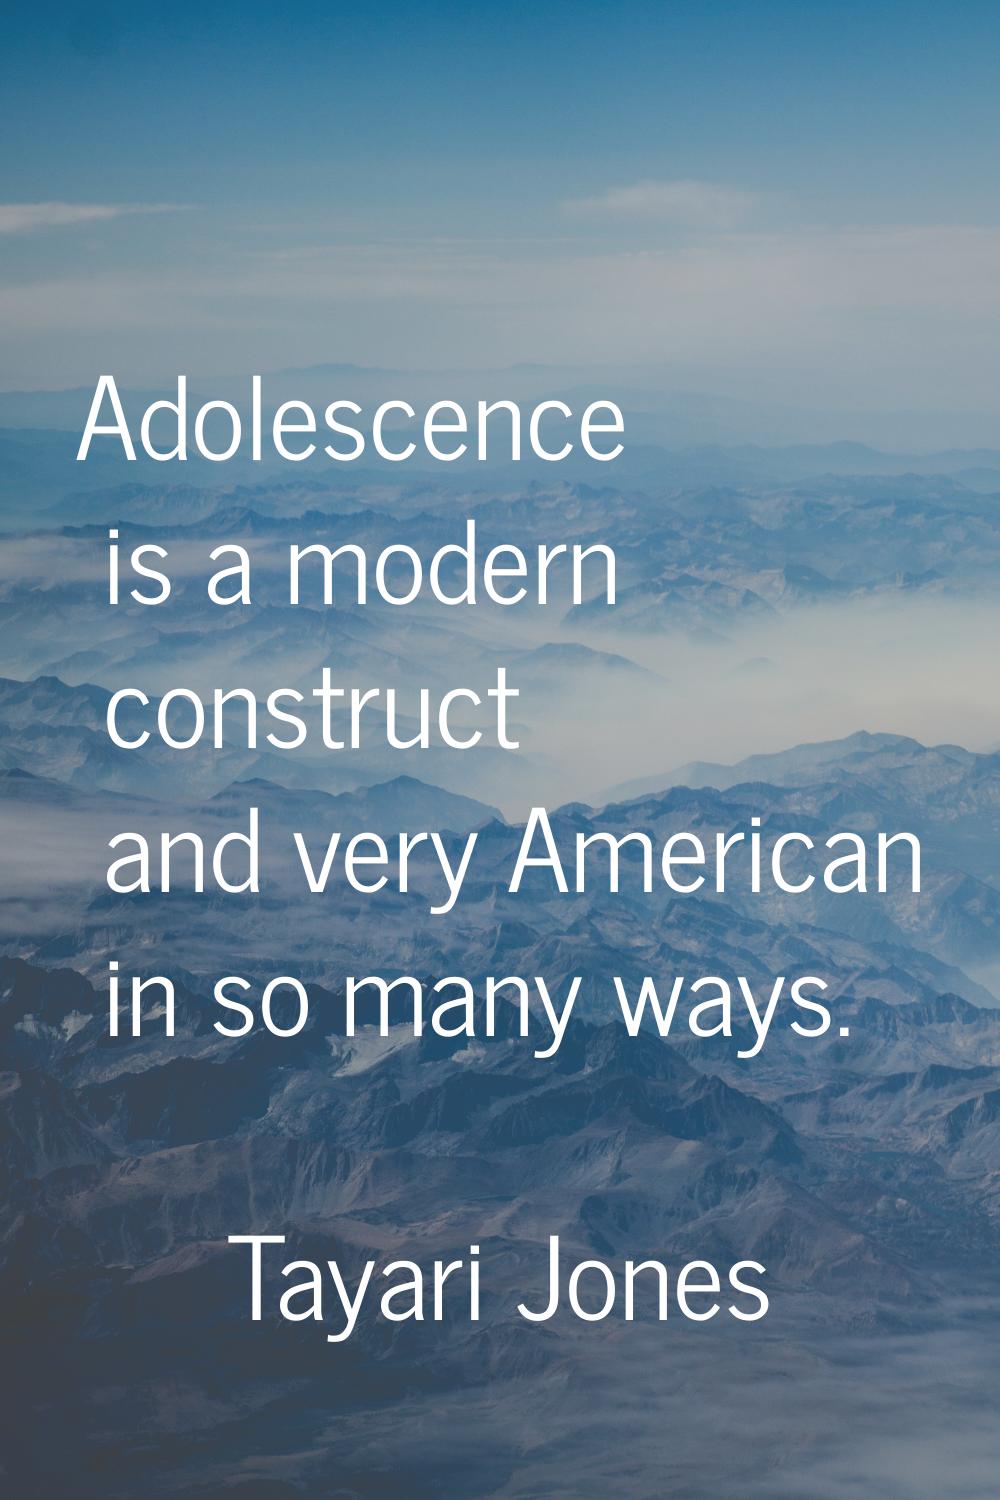 Adolescence is a modern construct and very American in so many ways.